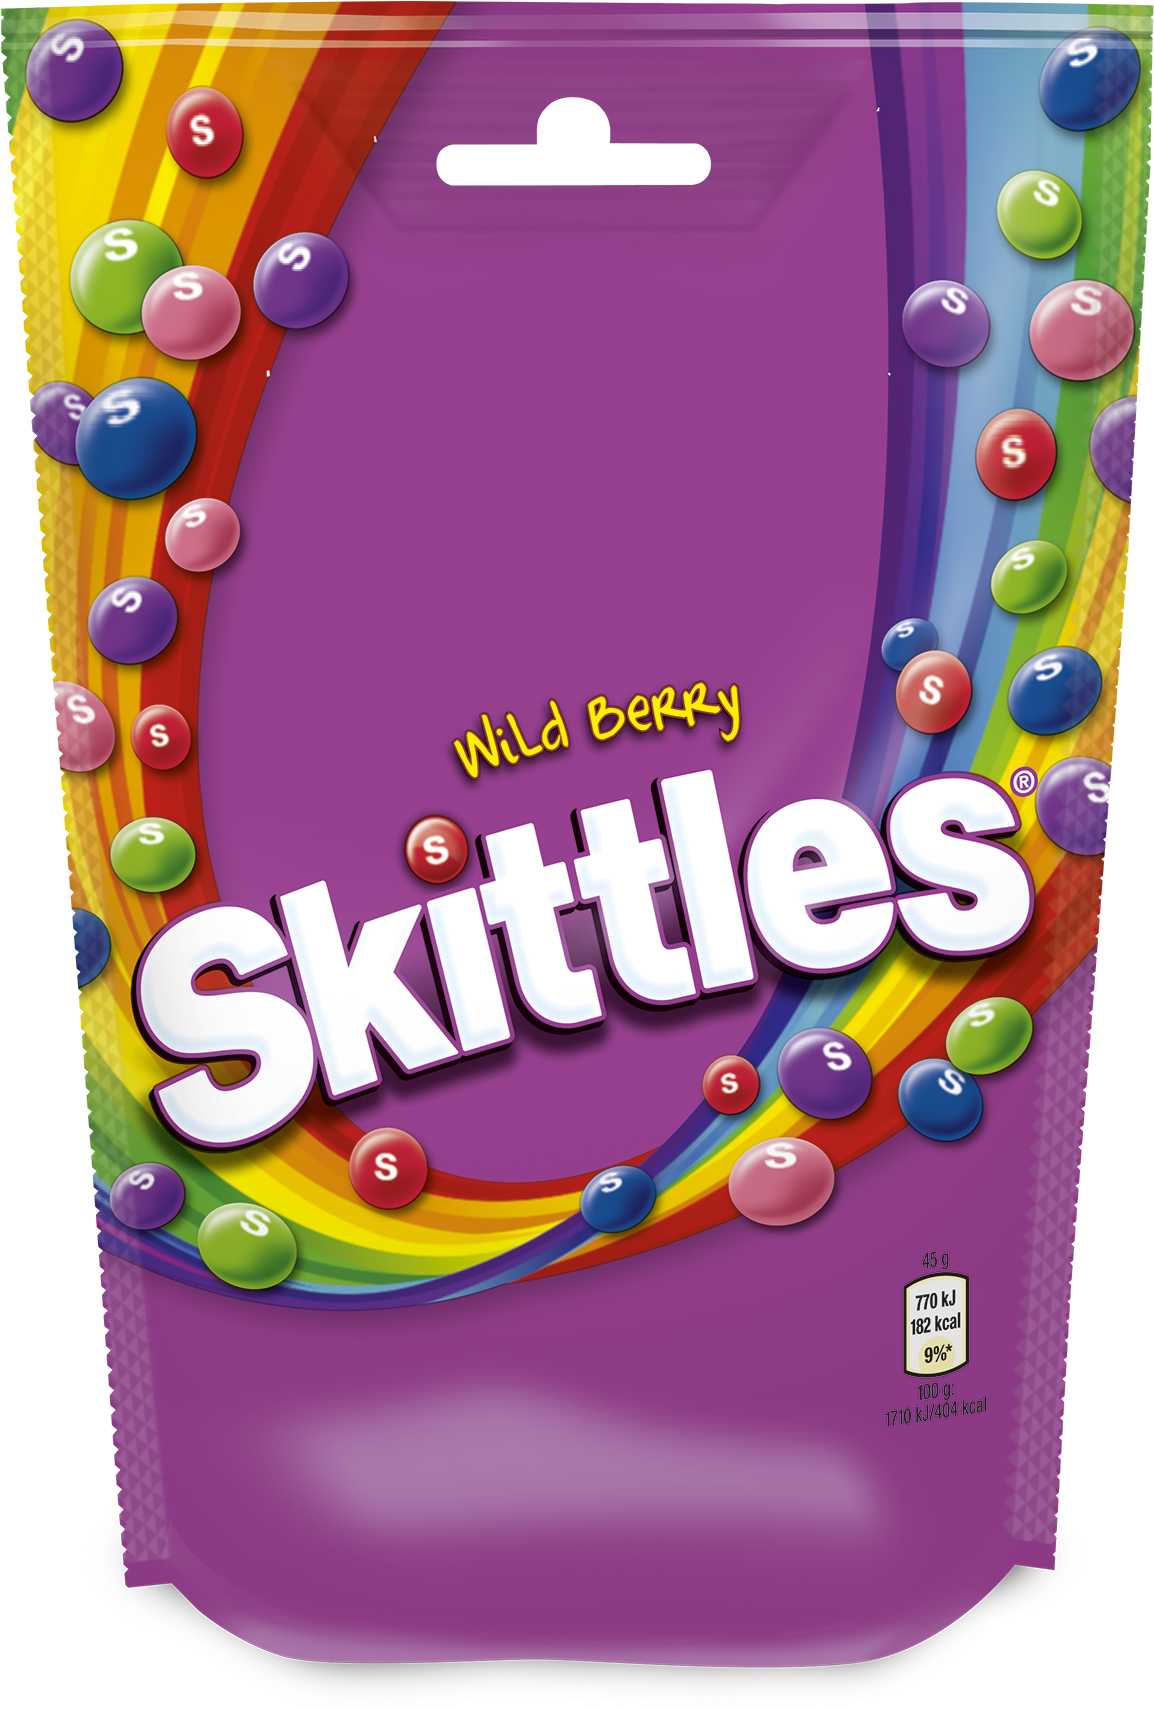 Wild Berry Skittles Package PNG